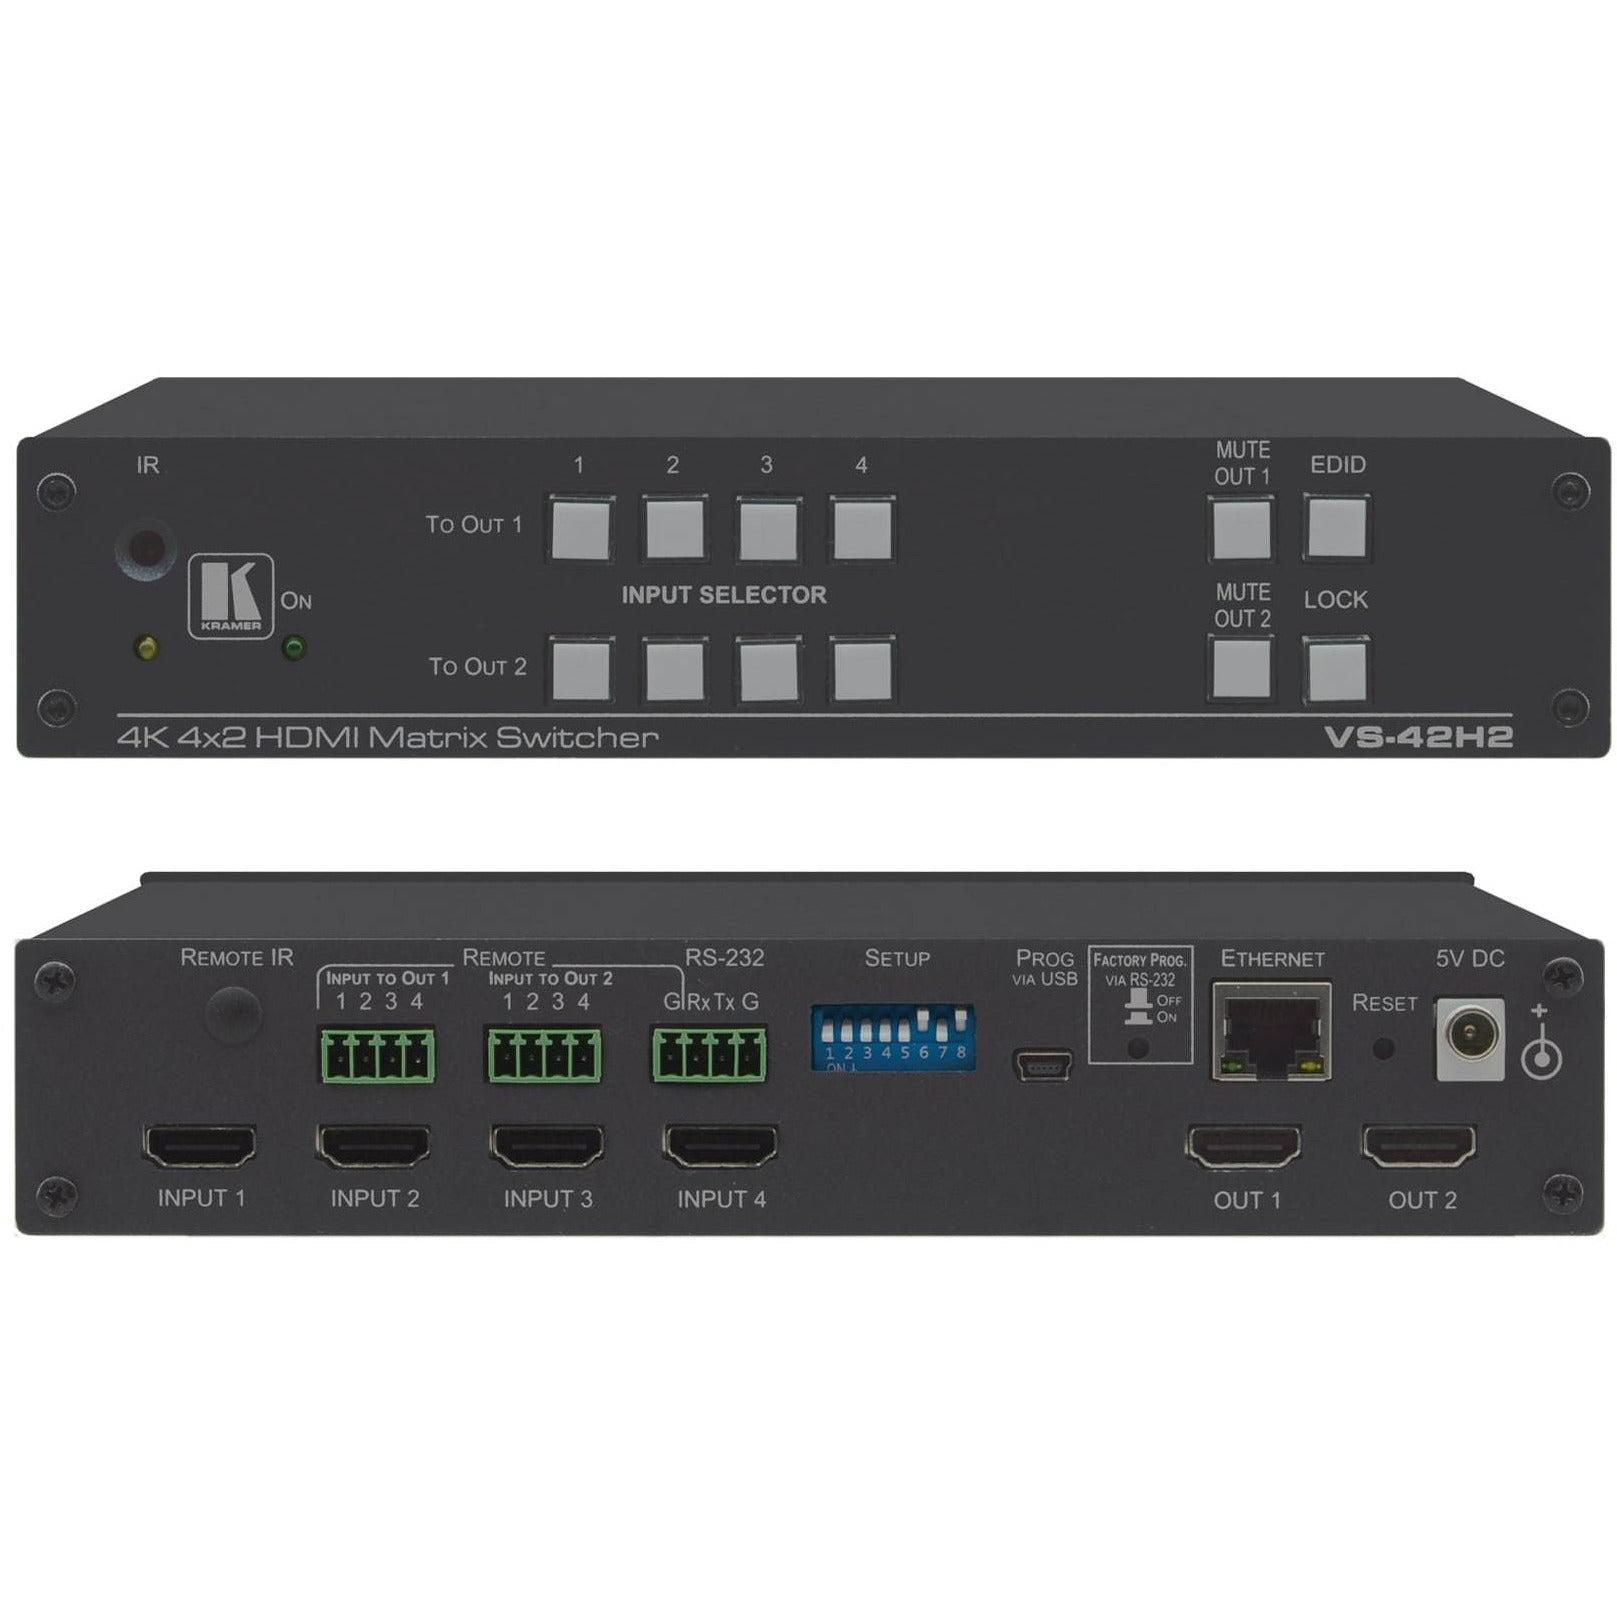 HDMI Switches and Matrixes